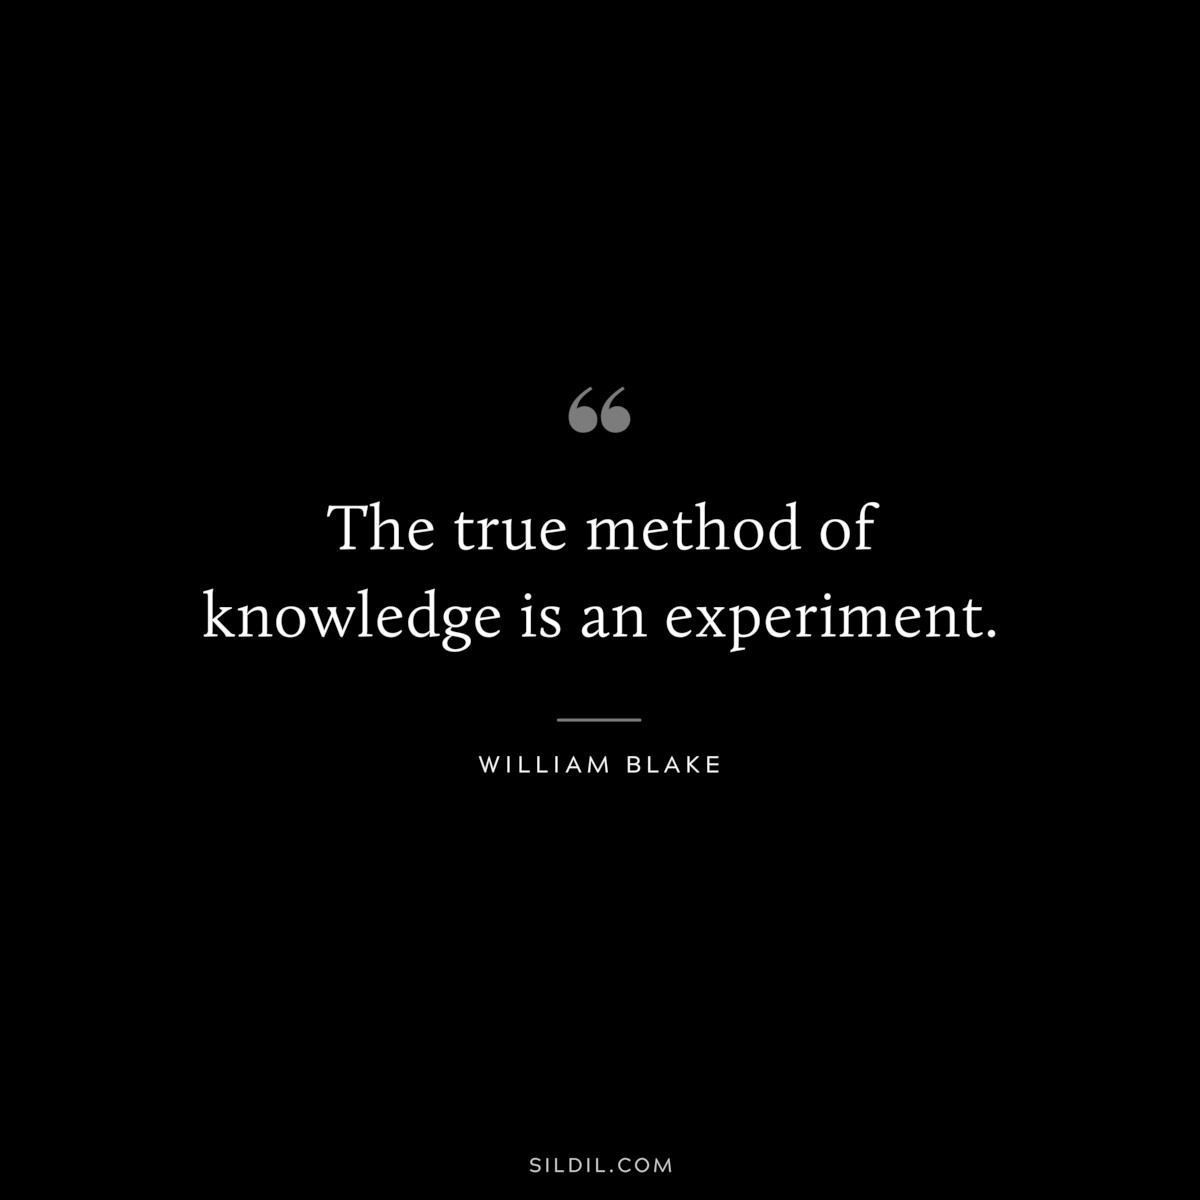 The true method of knowledge is an experiment. ― William Blake